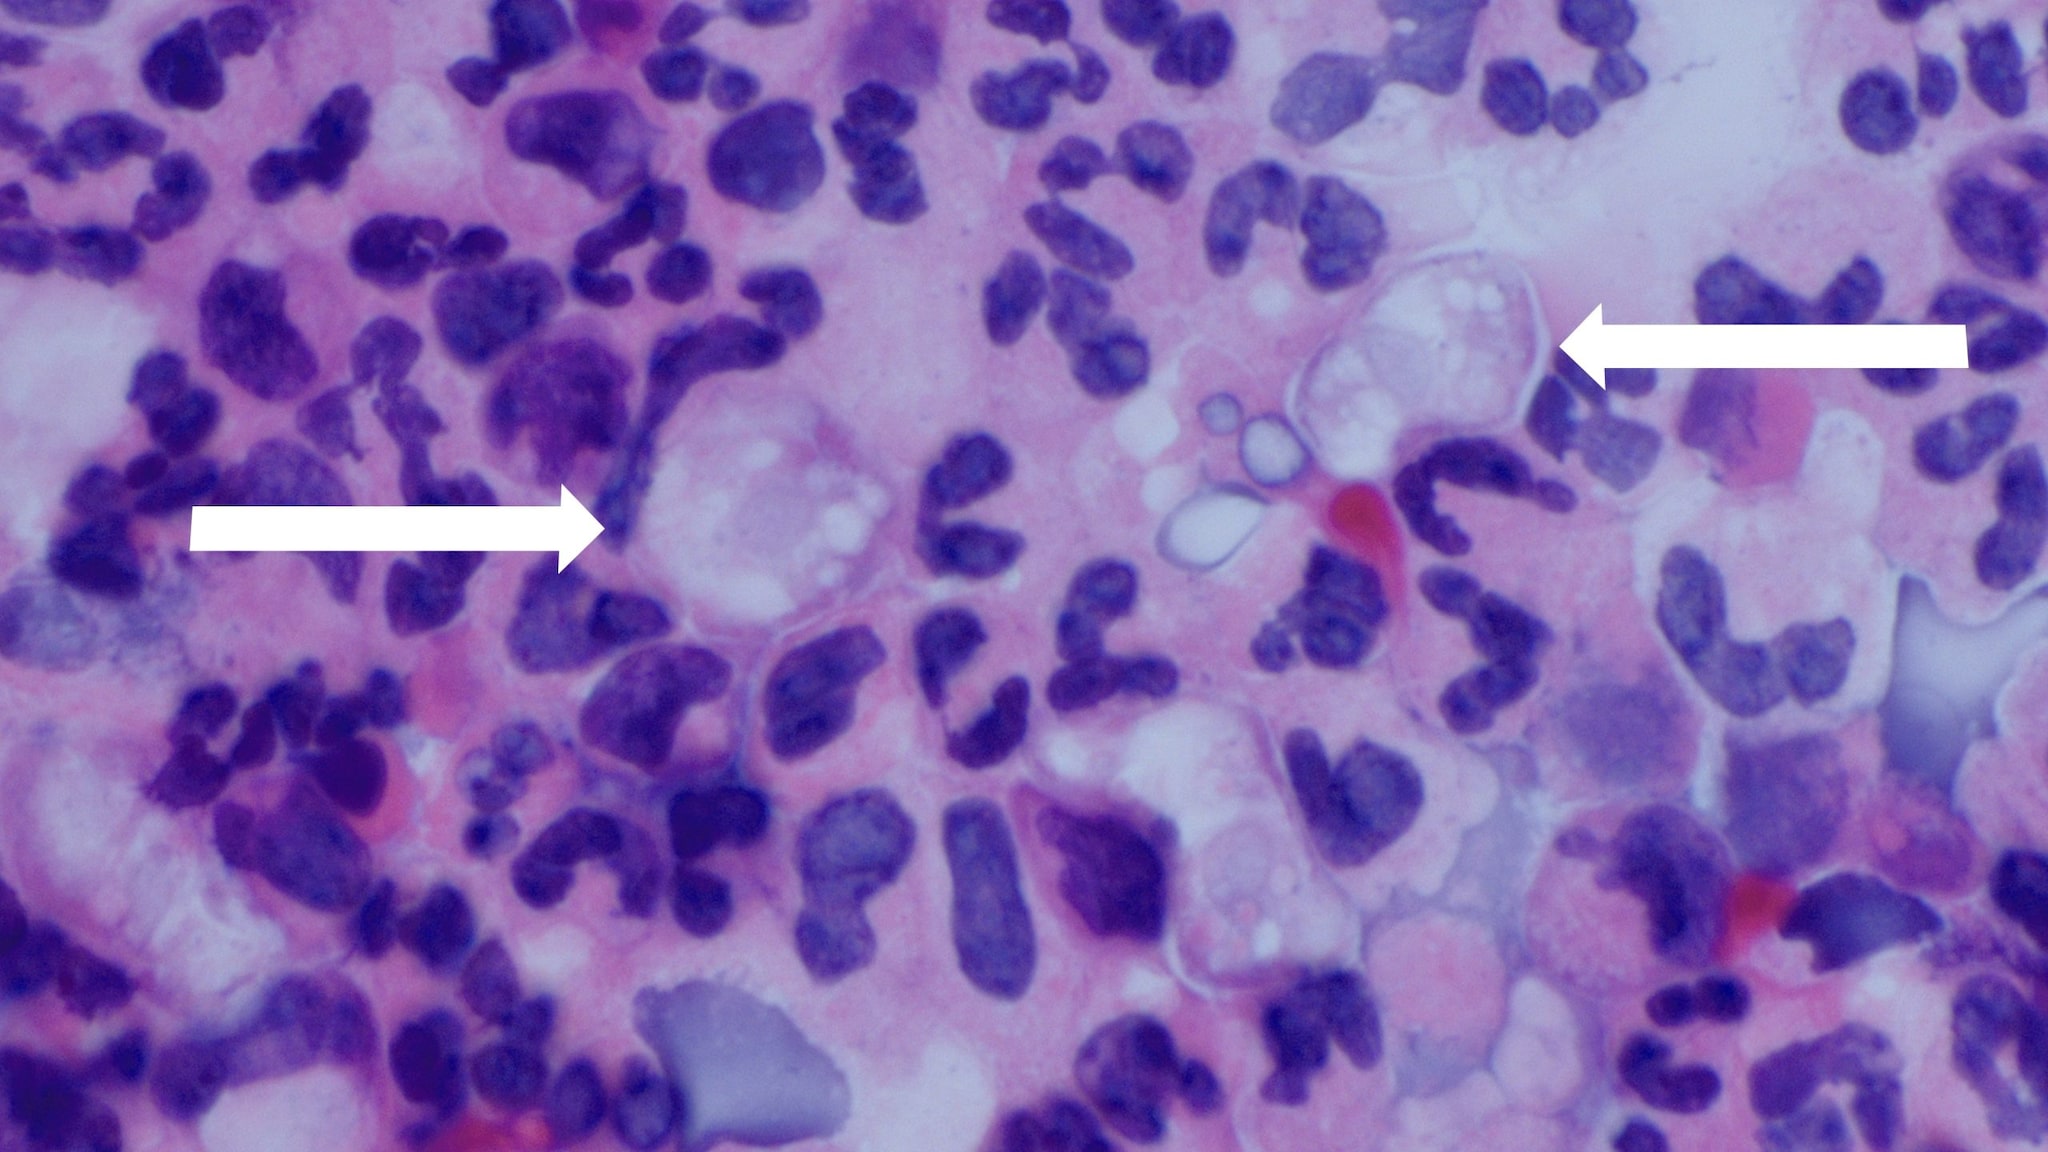 High resolution of a person's cerebrospinal fluid. Two arrows point to Naegleria fowleri amebas